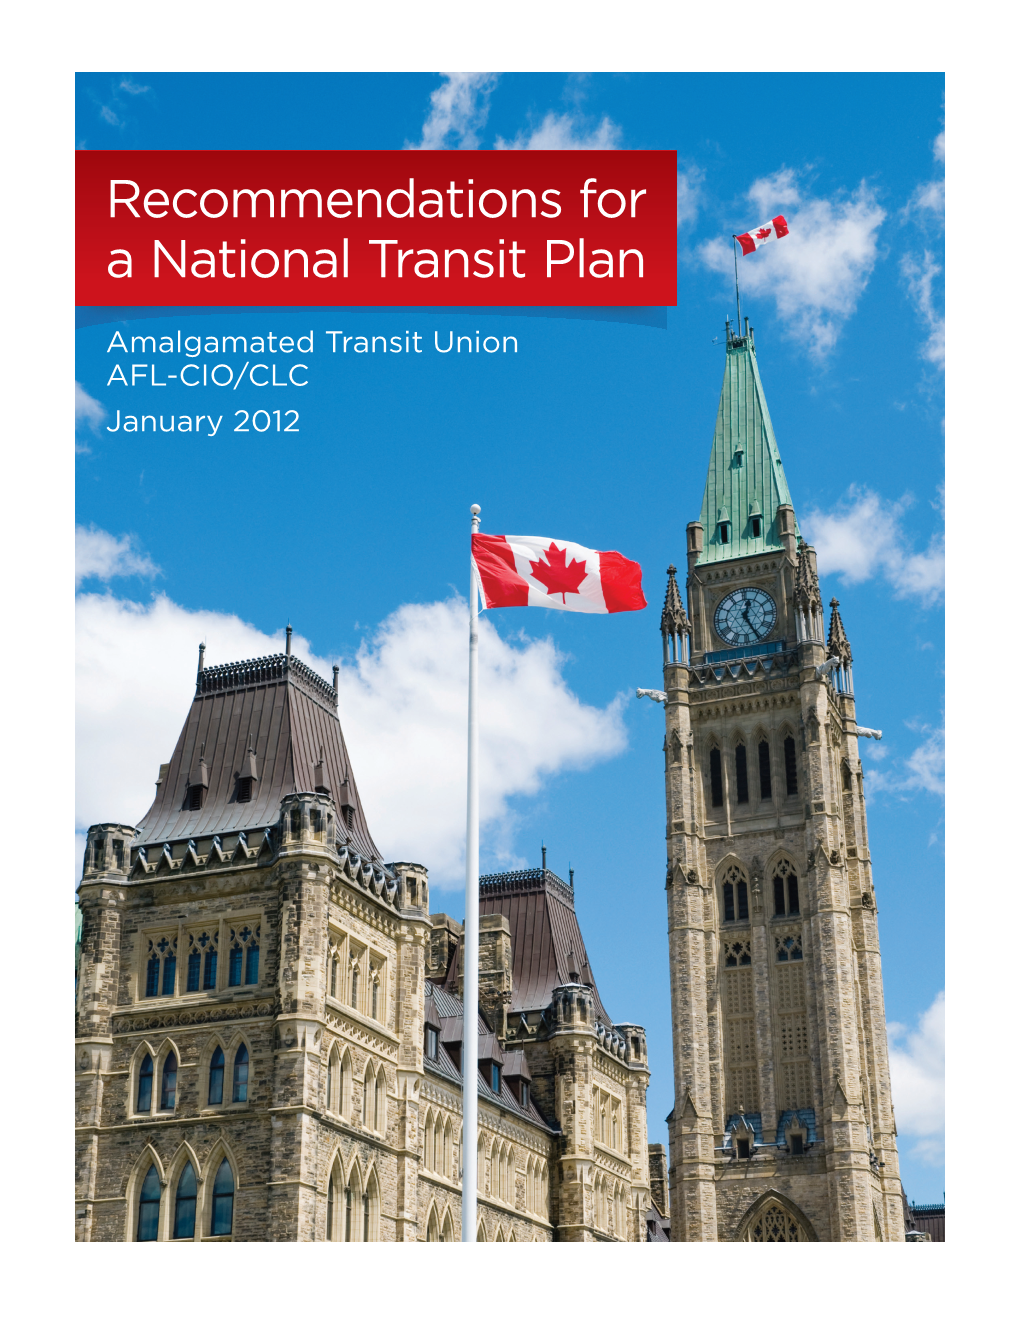 Recommendations for a National Transit Plan